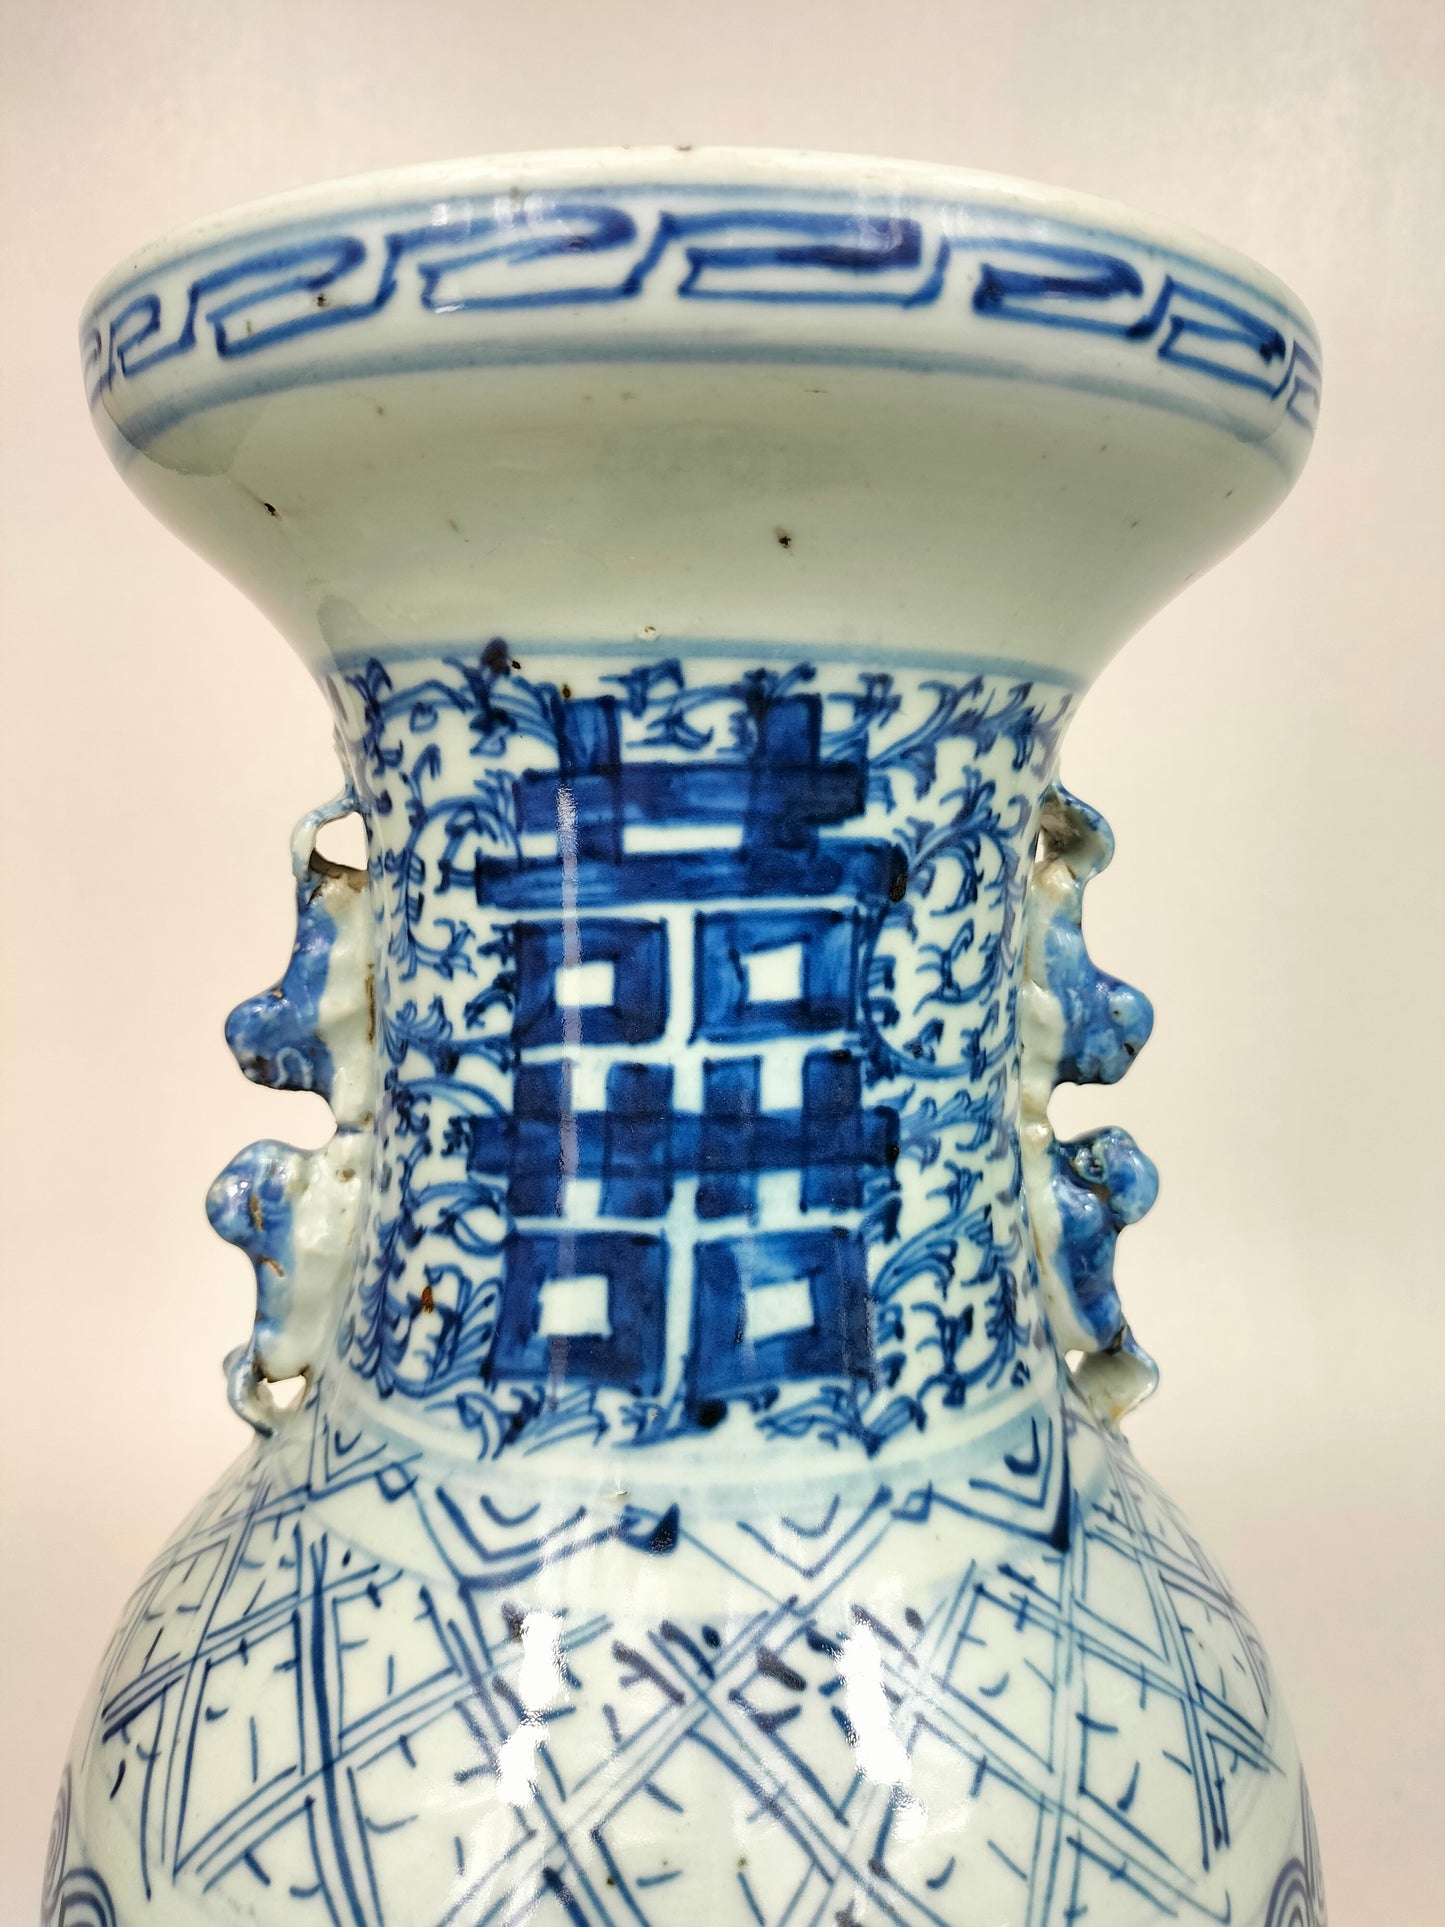 Antique Chinese double happiness vase // Blue white - Qing Dynasty - 19th century